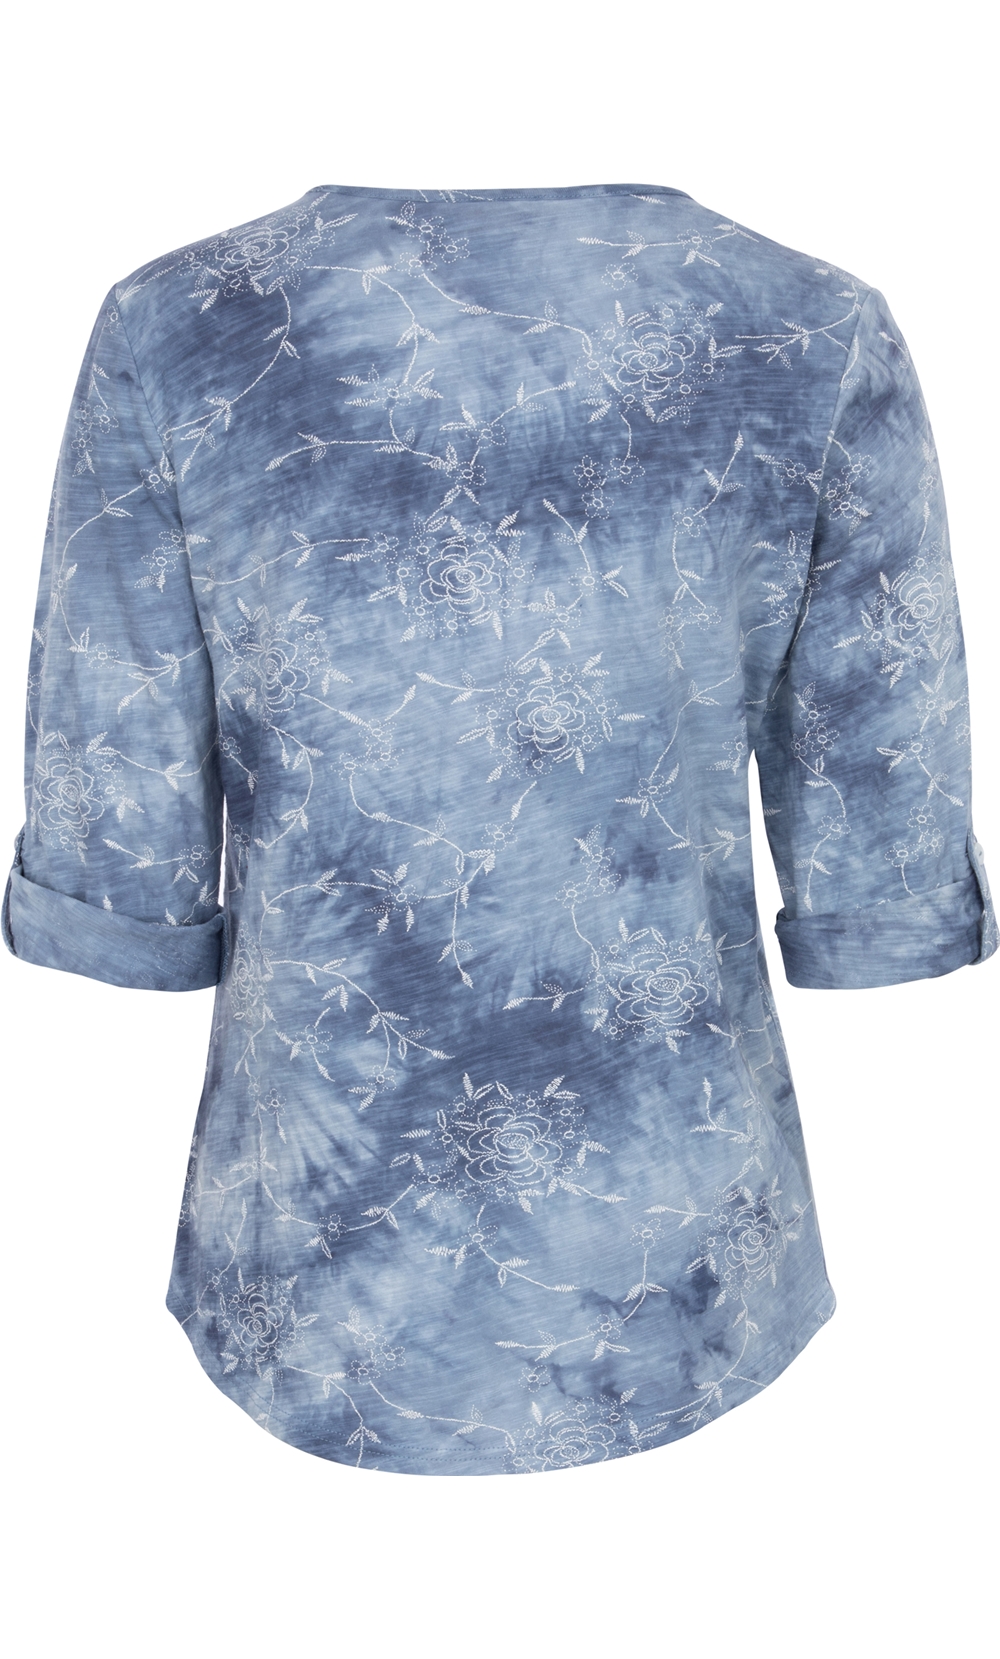 Anna Rose Print And Tie Dye top